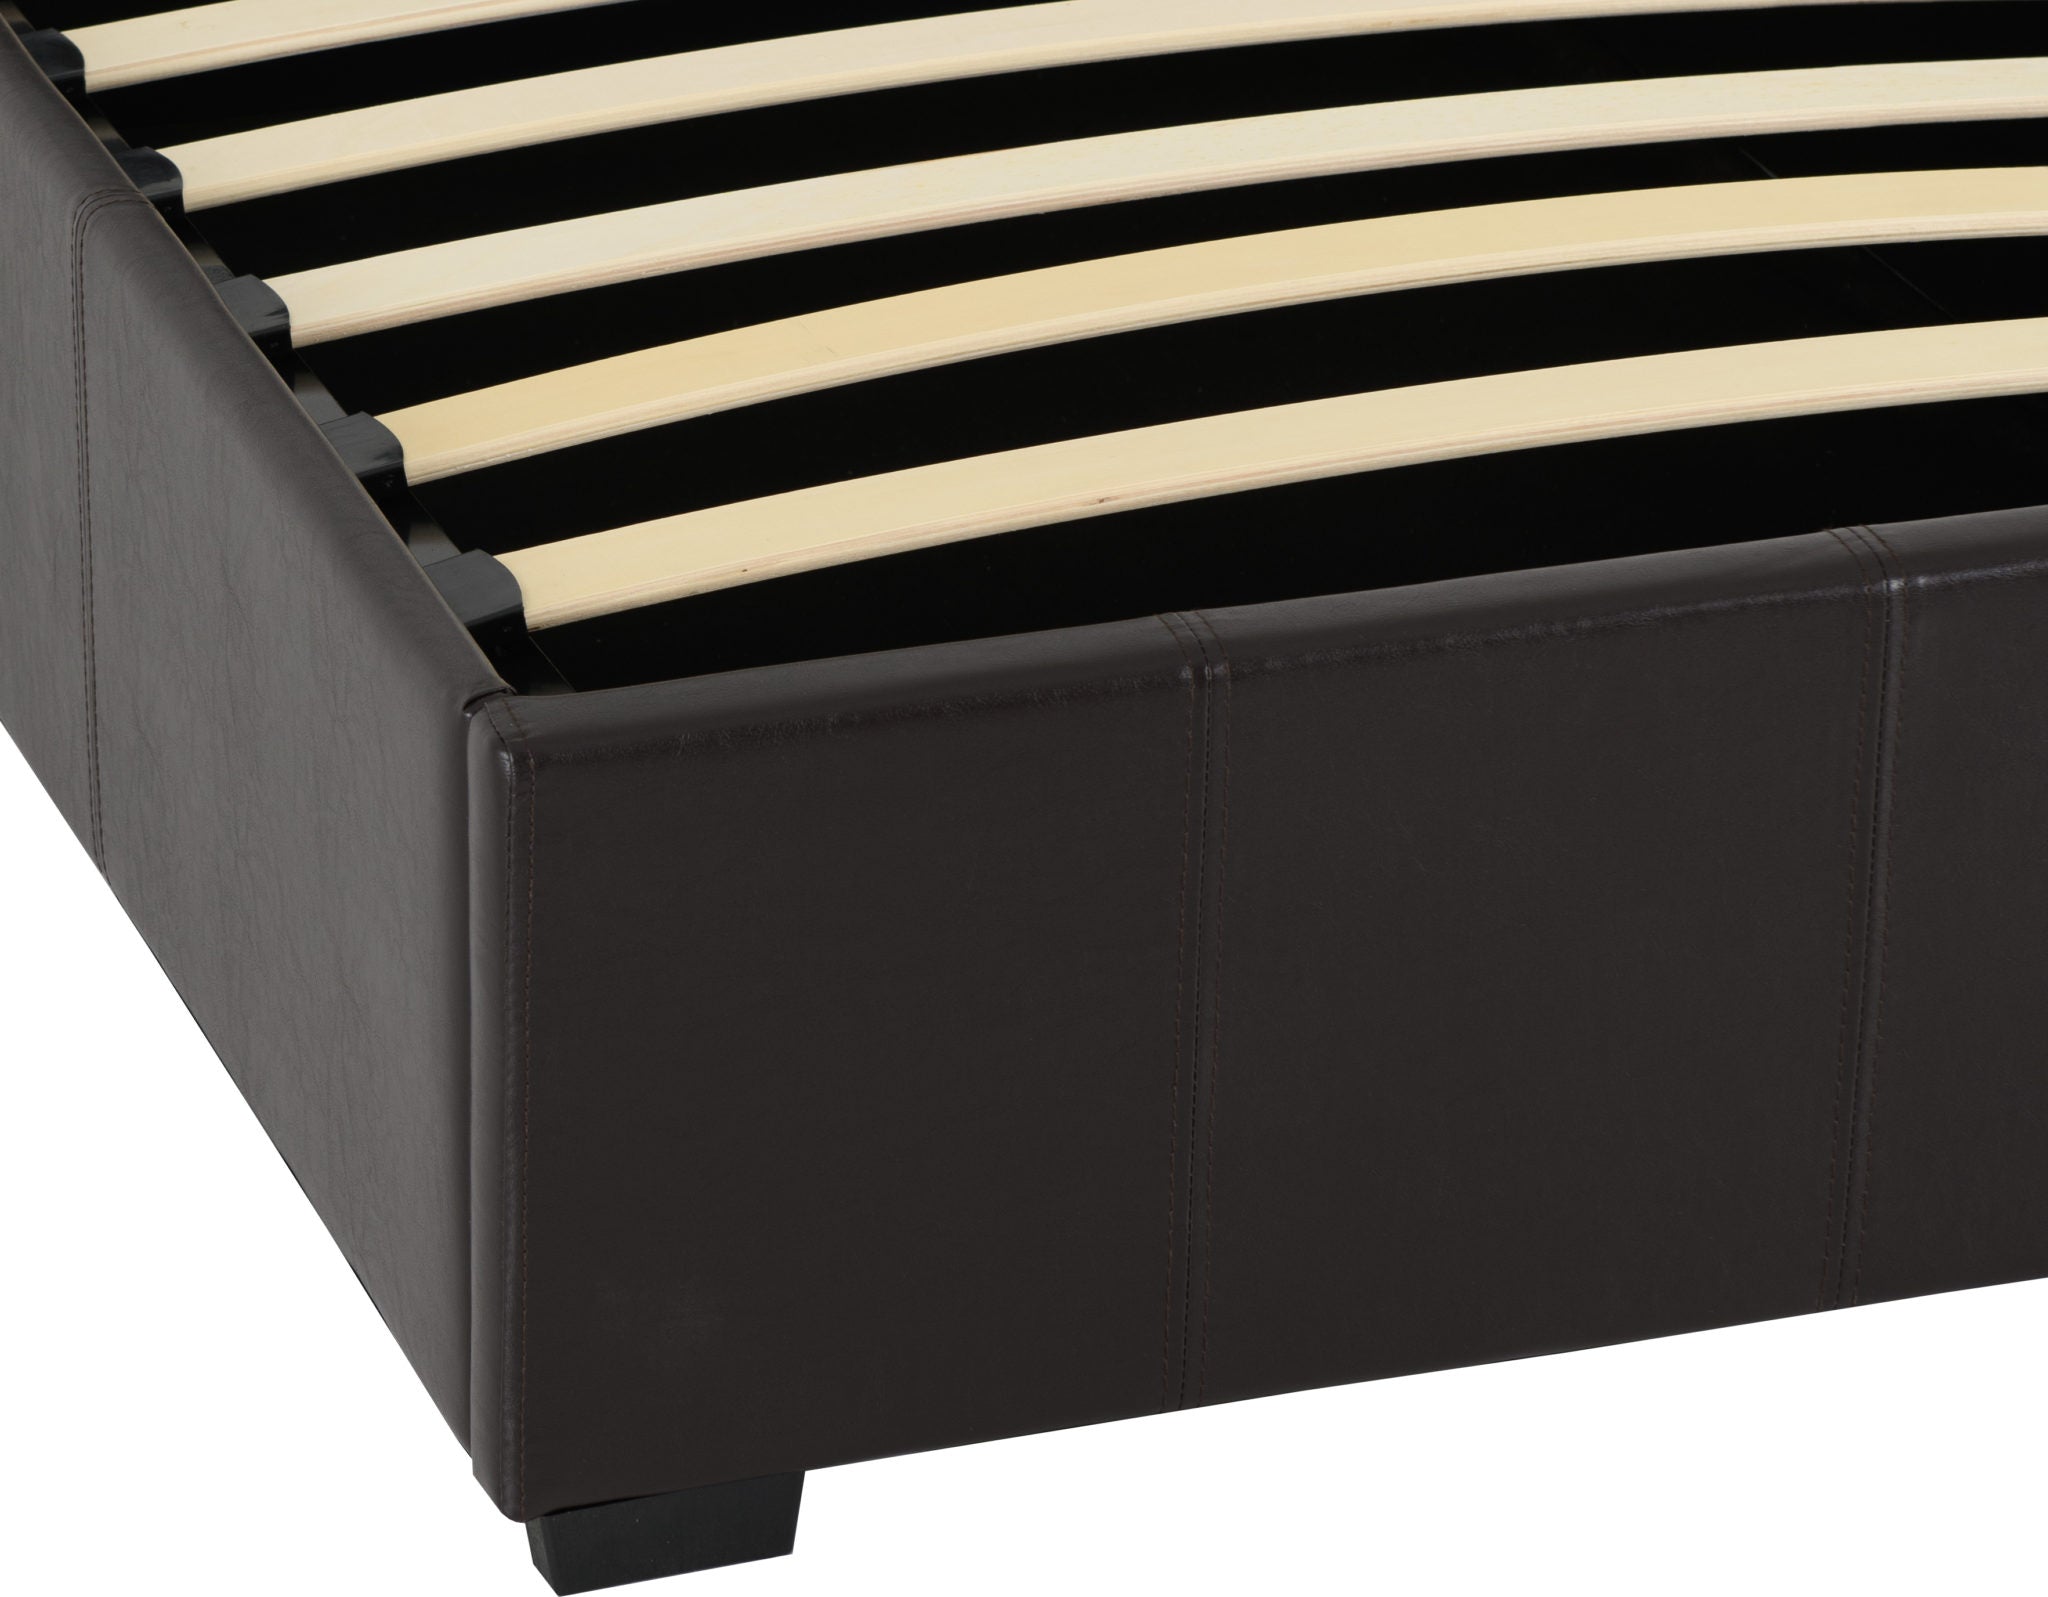 Waverley 3' Storage Bed Brown Faux Leather